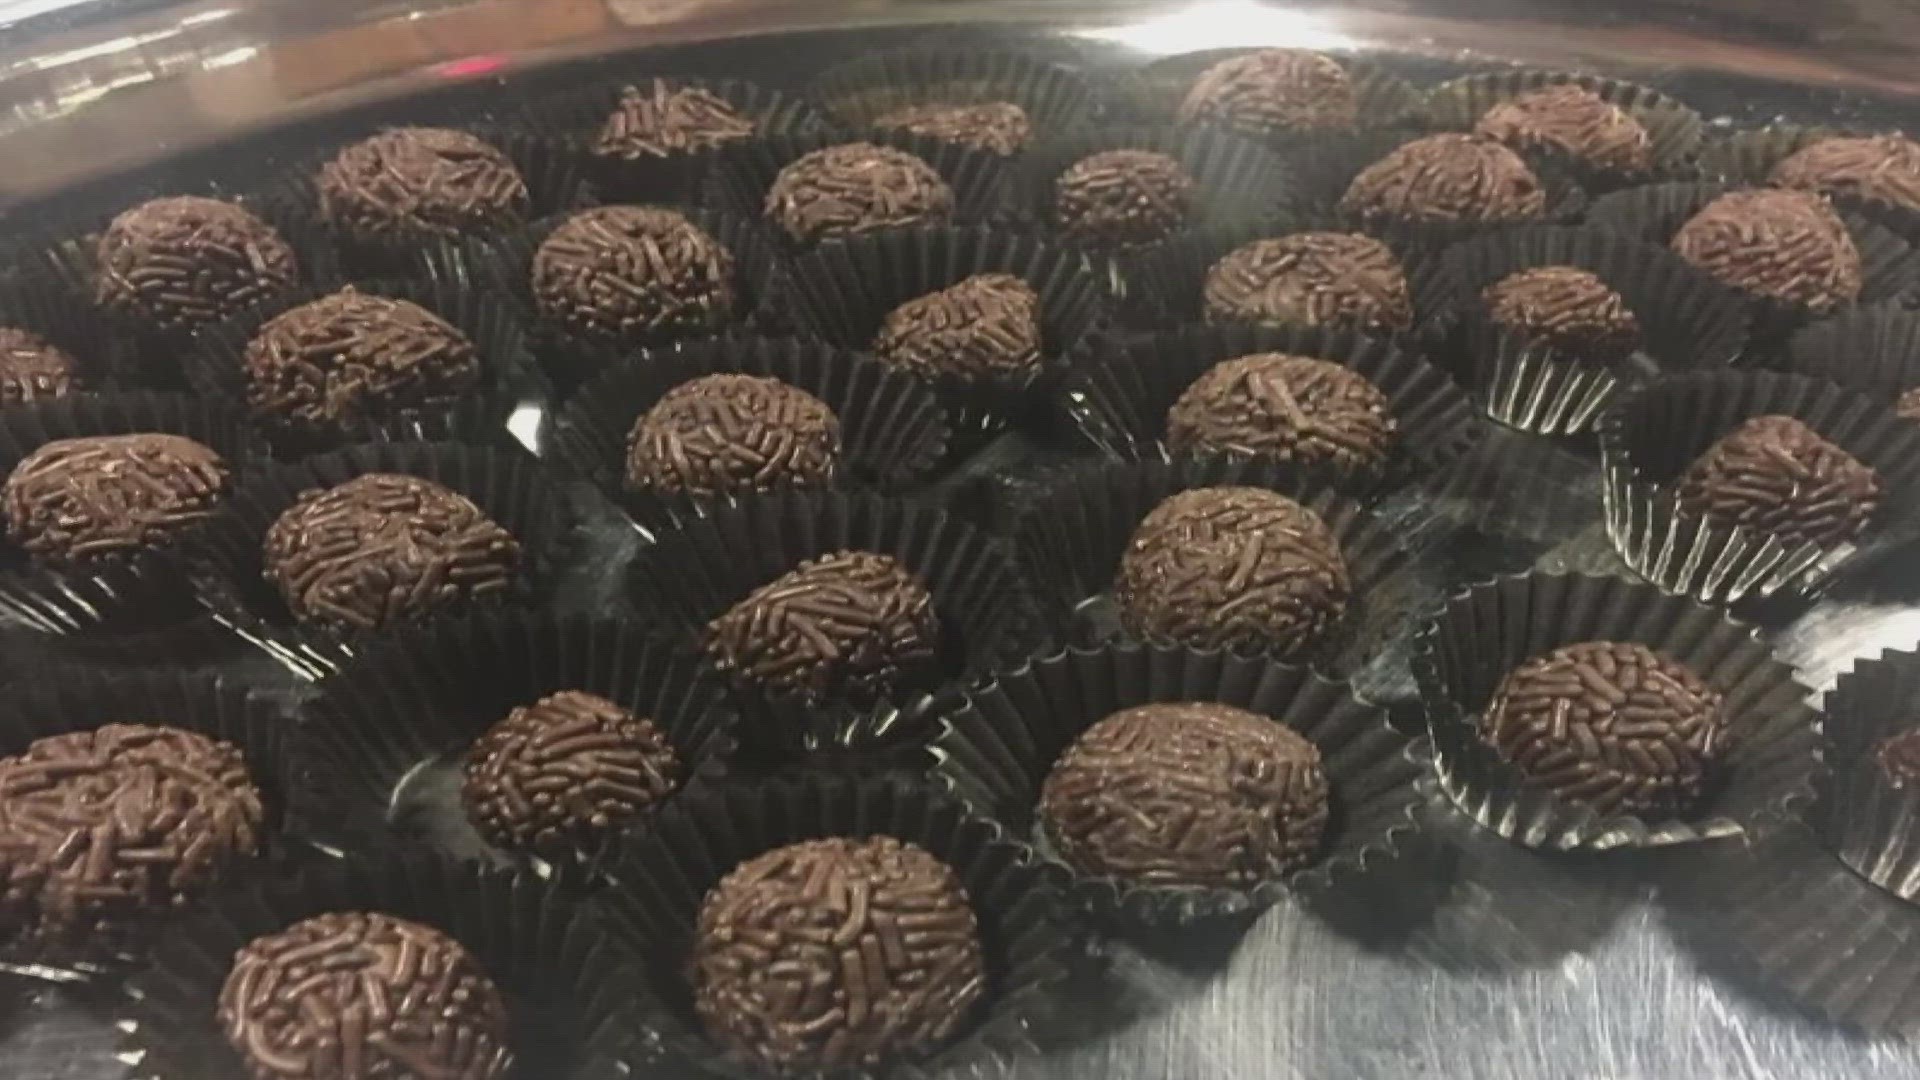 Colorado Cocoa Pod will be one of the chocolatiers at the Colorado Chocolate Festival happening this weekend at the Crowne Plaza Convention Center.